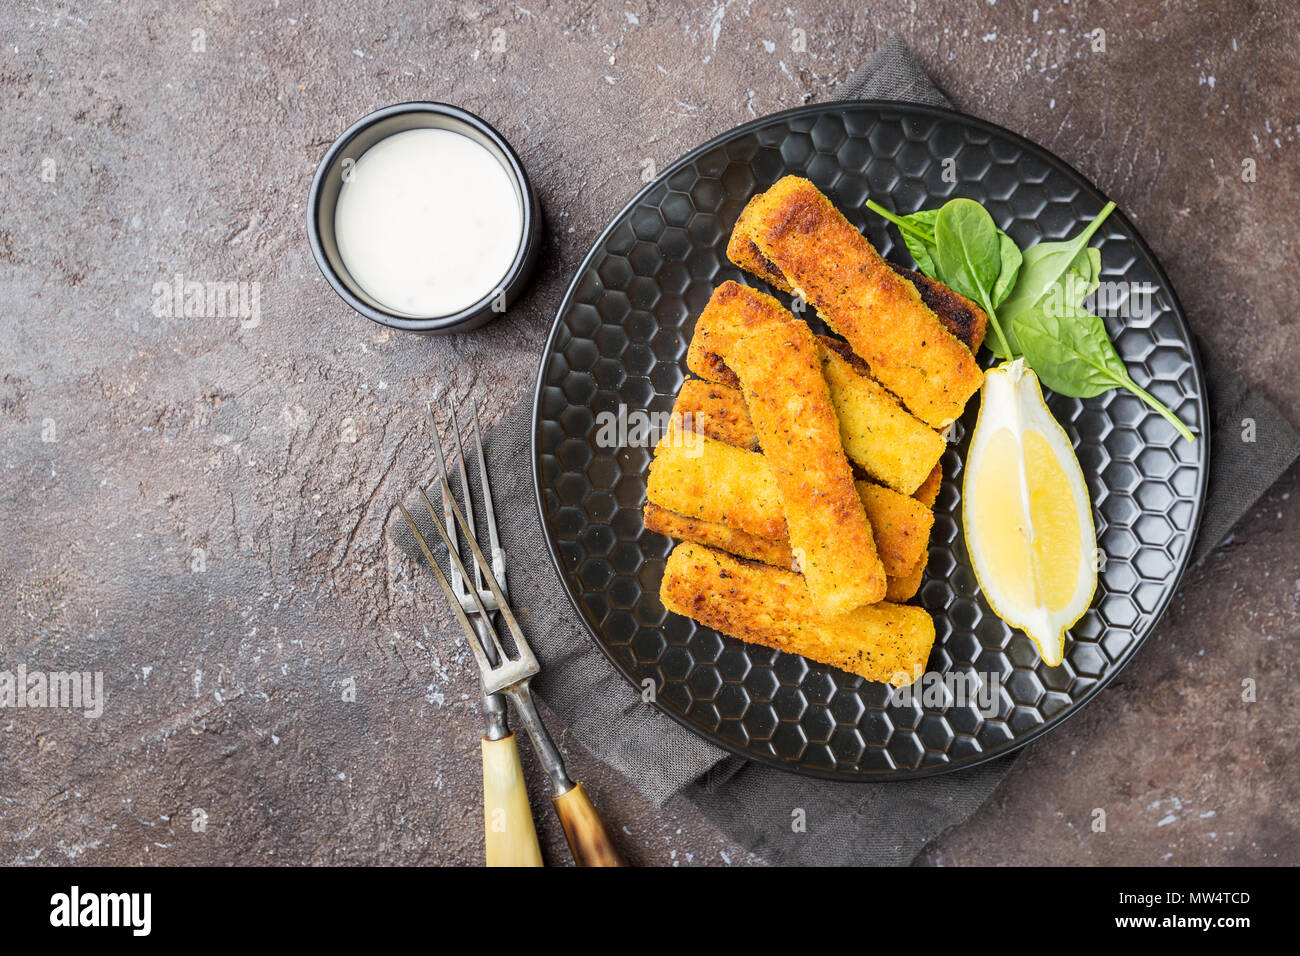 Tasty savory snack of crumbed fish fingers sticks served on a plate with lemon over dark stone background, top view with copy space Stock Photo